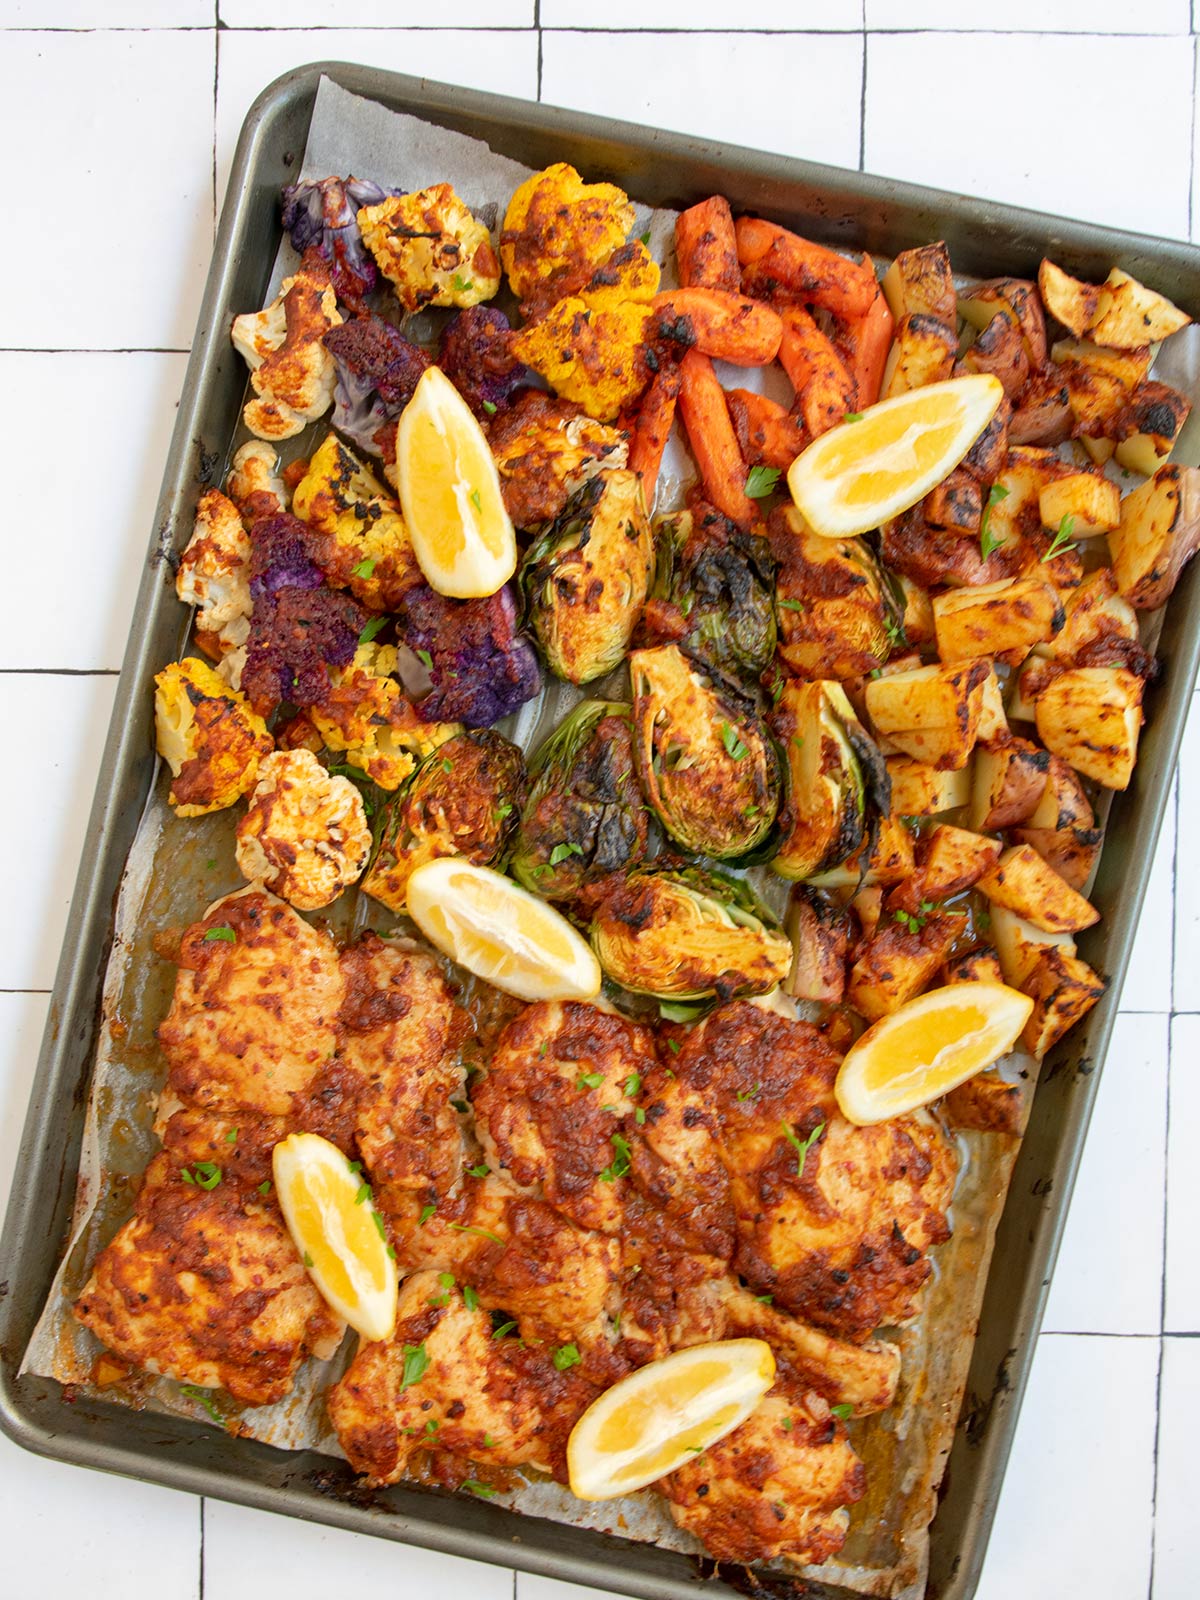 Harissa chicken and vegetables cooked on sheet tray with lemon slices on top.